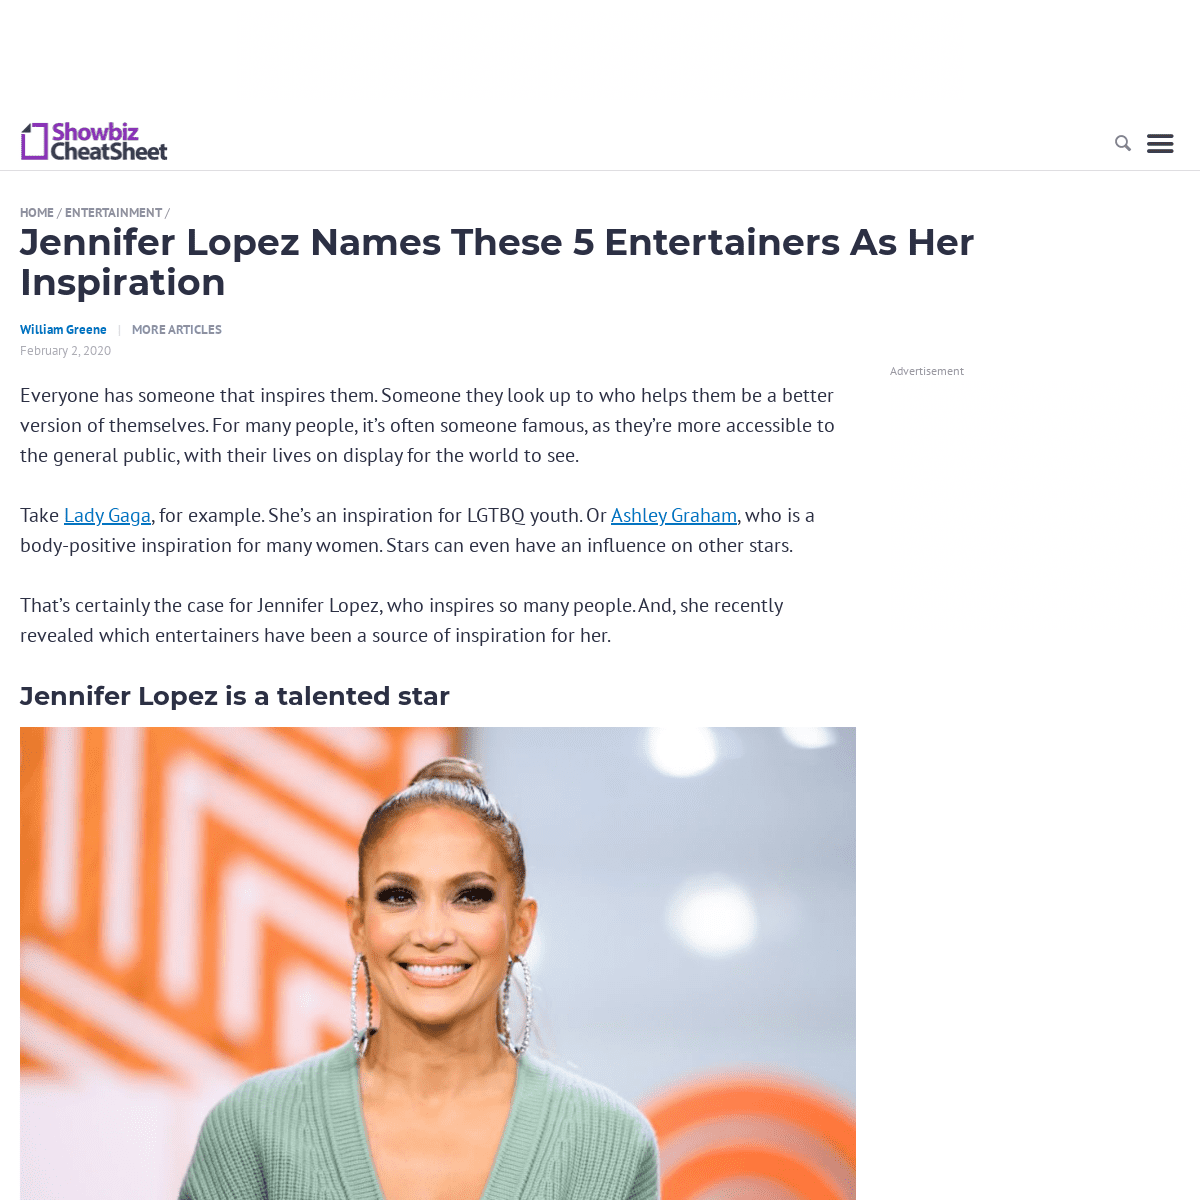 A complete backup of www.cheatsheet.com/entertainment/jennifer-lopez-names-these-5-entertainers-as-her-inspiration.html/